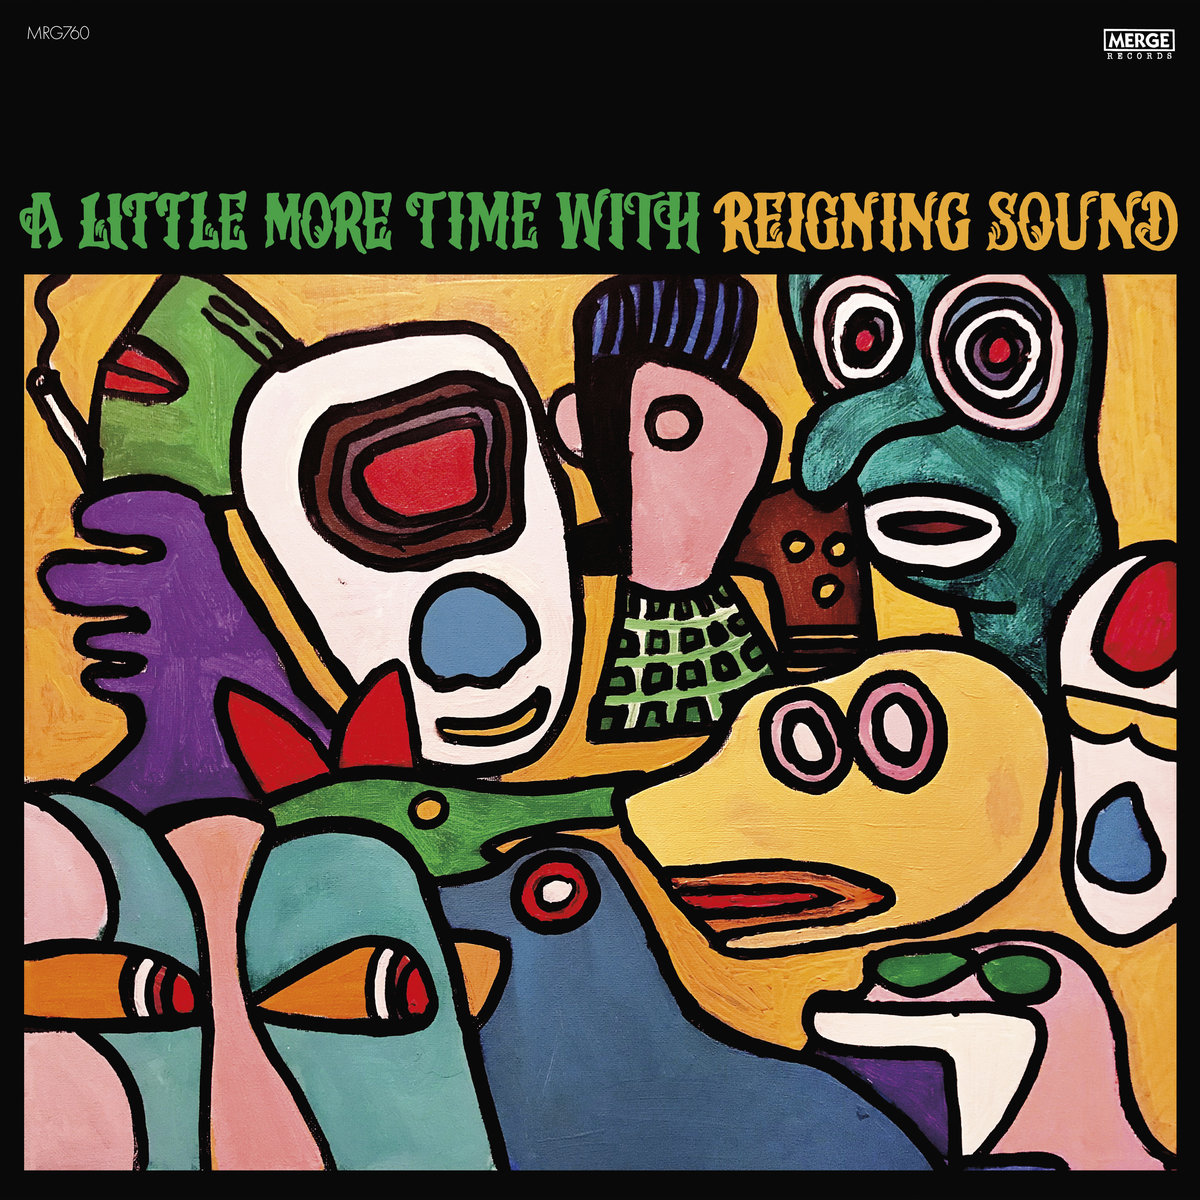 Reigning Sound - A little more time with Reining Sound (2021)